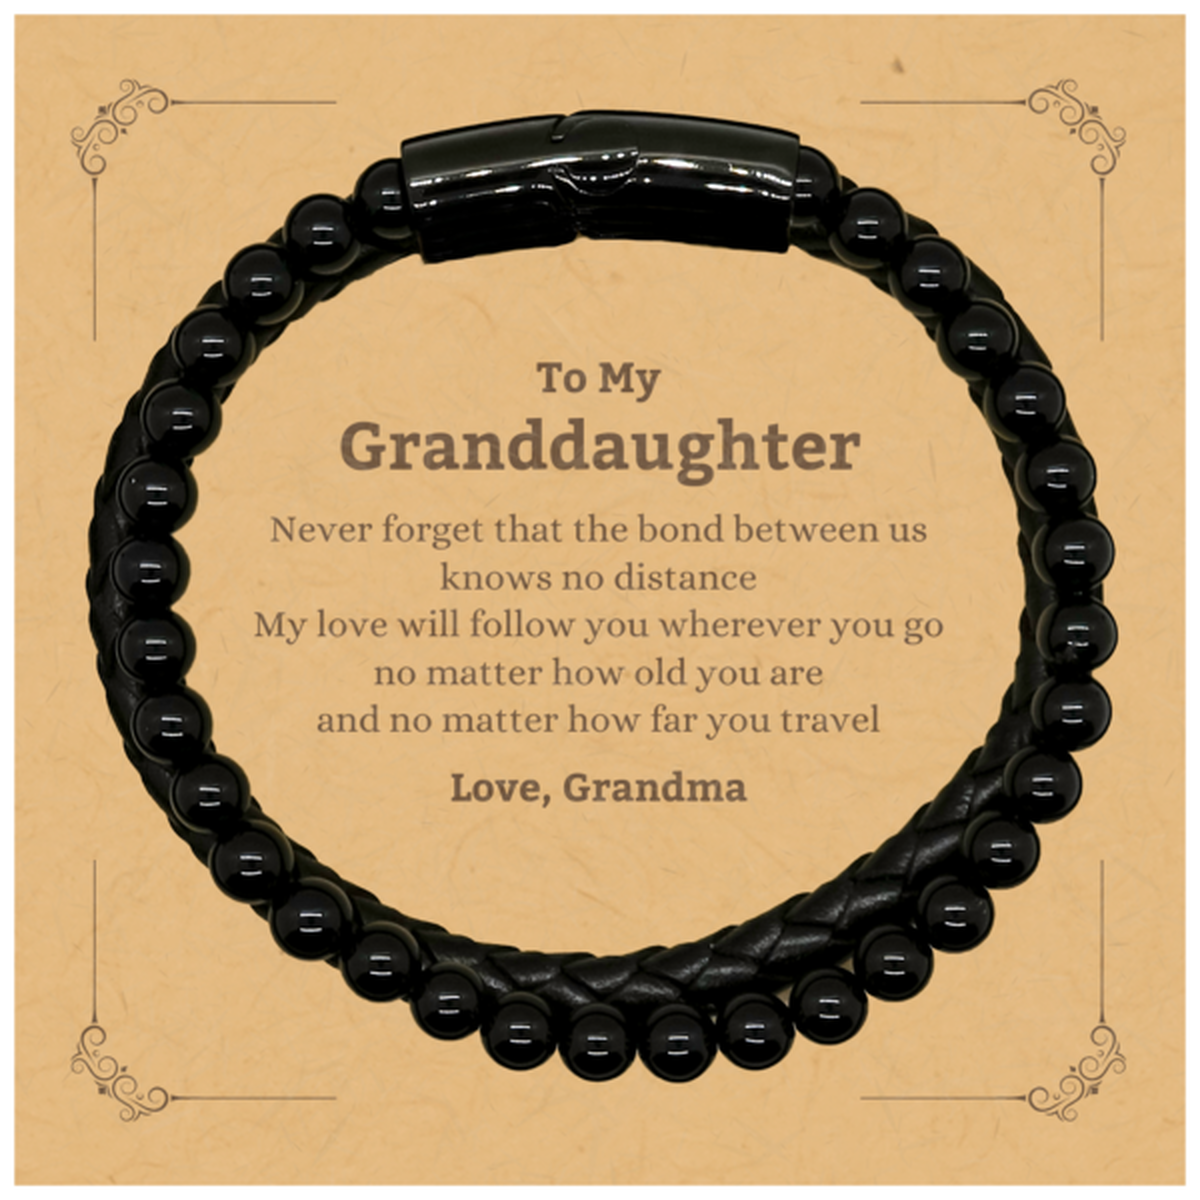 Granddaughter Birthday Gifts from Grandma, Adjustable Stone Leather Bracelets for Granddaughter Christmas Graduation Unique Gifts Granddaughter Never forget that the bond between us knows no distance. Love, Grandma